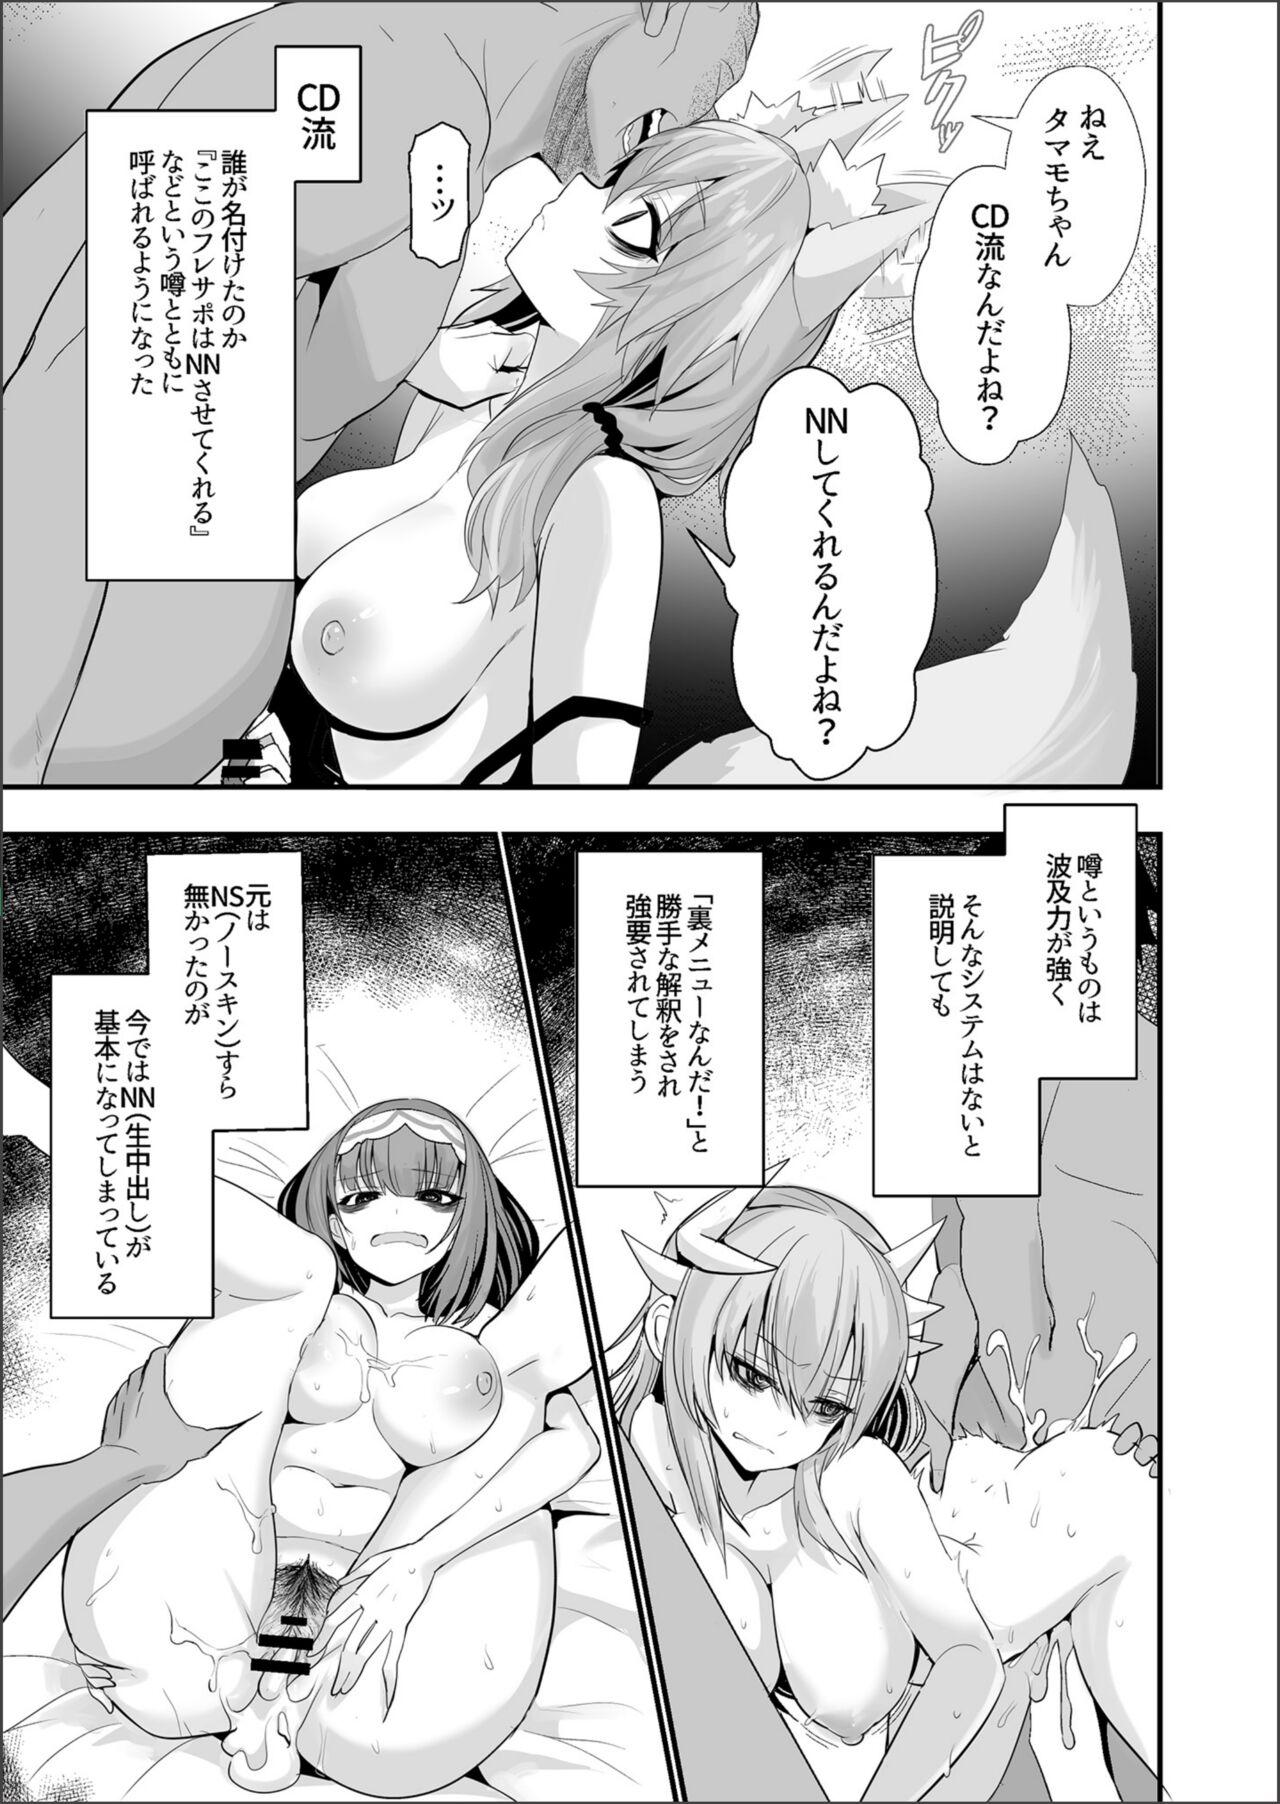 Story Dead eyes sex woker Tamamo 2 - Fate grand order Latino - Page 7